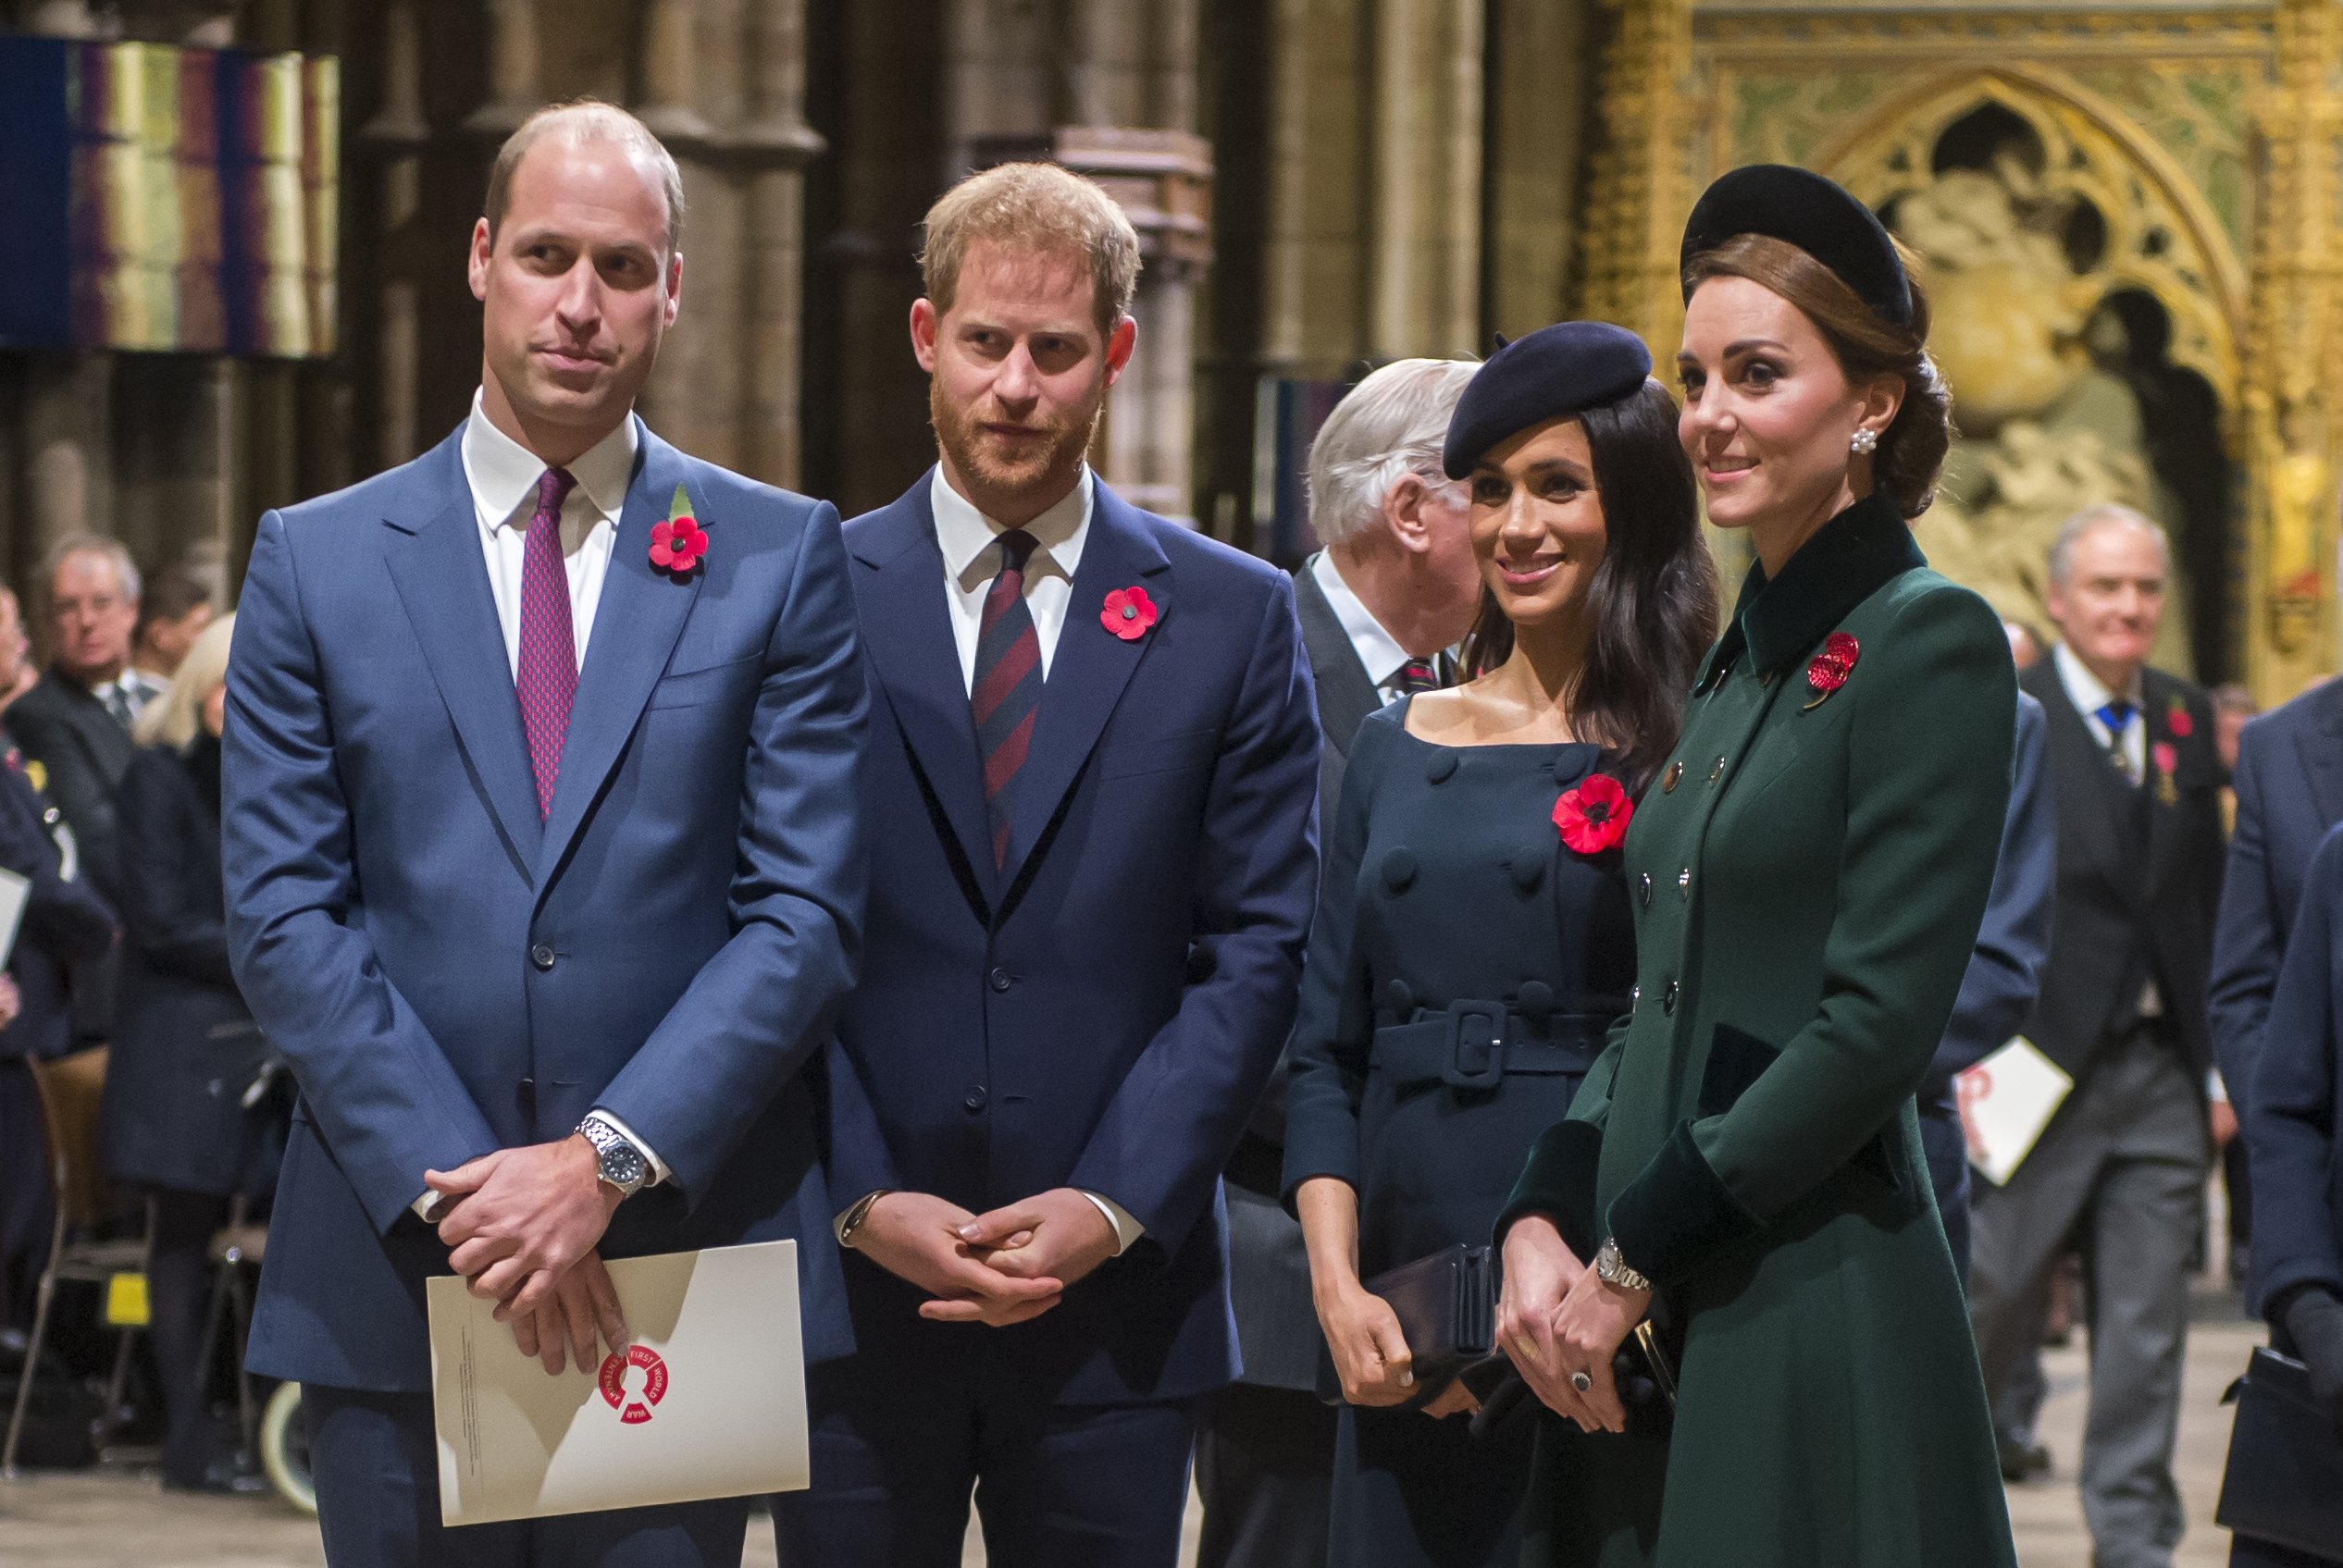 Prince William, Prince Harry, Meghan Markle and Kate Middleton arrive at Westminster Abbey to attend an Armistice Centenary Memorial Service on November 11, 2018 in London.  |  Source: Getty Images